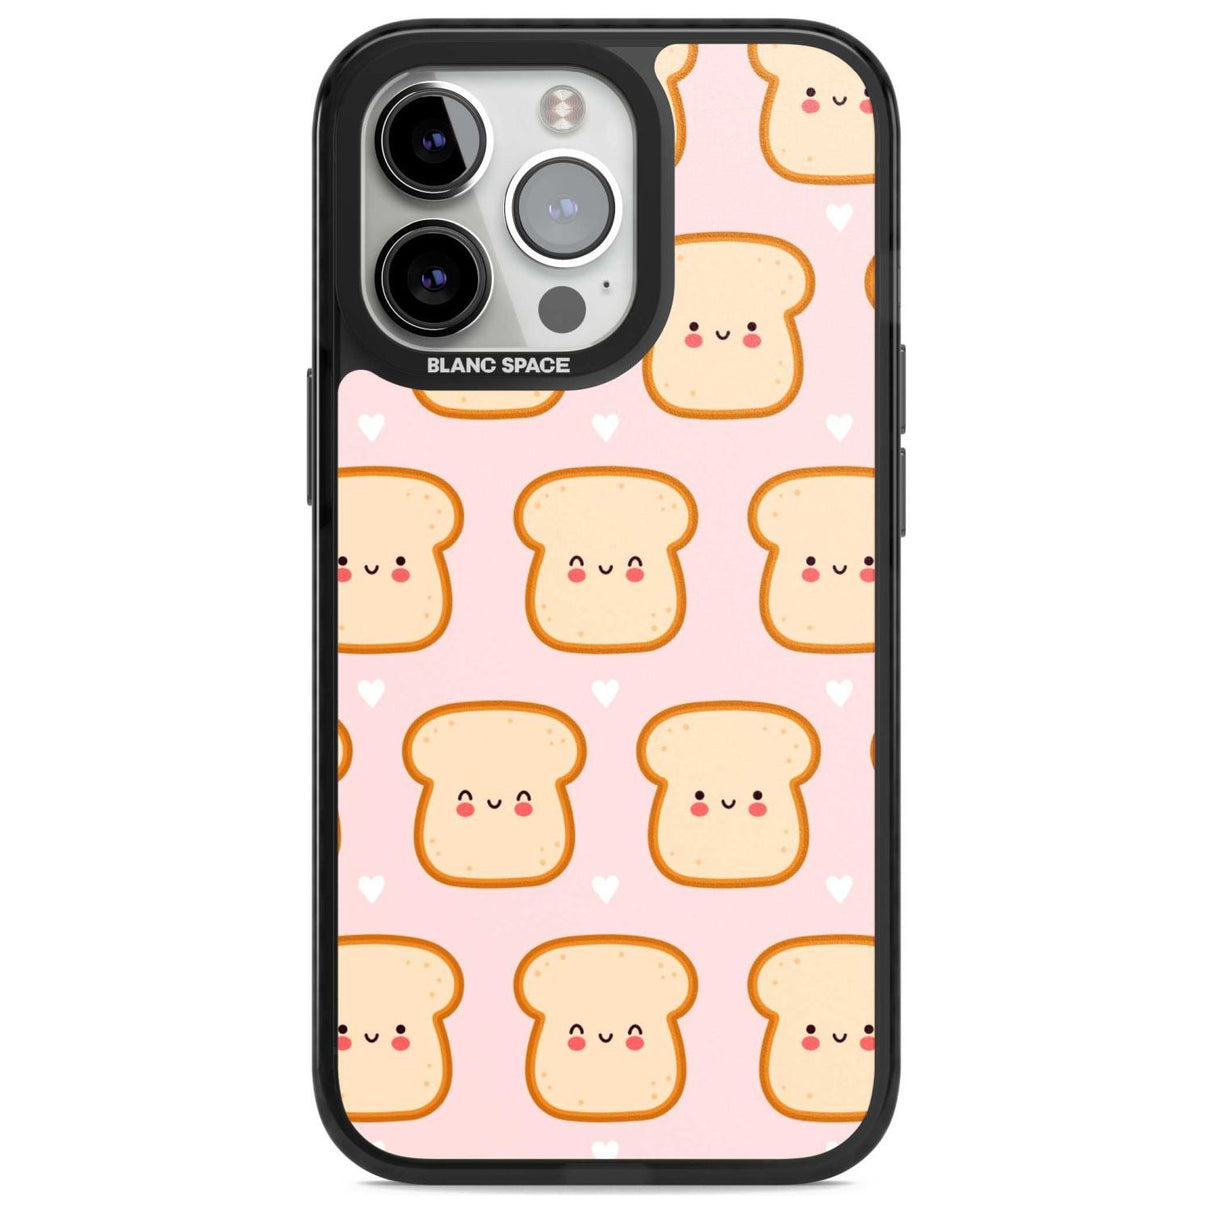 Bread Faces Kawaii Pattern Phone Case iPhone 15 Pro Max / Magsafe Black Impact Case,iPhone 15 Pro / Magsafe Black Impact Case,iPhone 14 Pro Max / Magsafe Black Impact Case,iPhone 14 Pro / Magsafe Black Impact Case,iPhone 13 Pro / Magsafe Black Impact Case Blanc Space